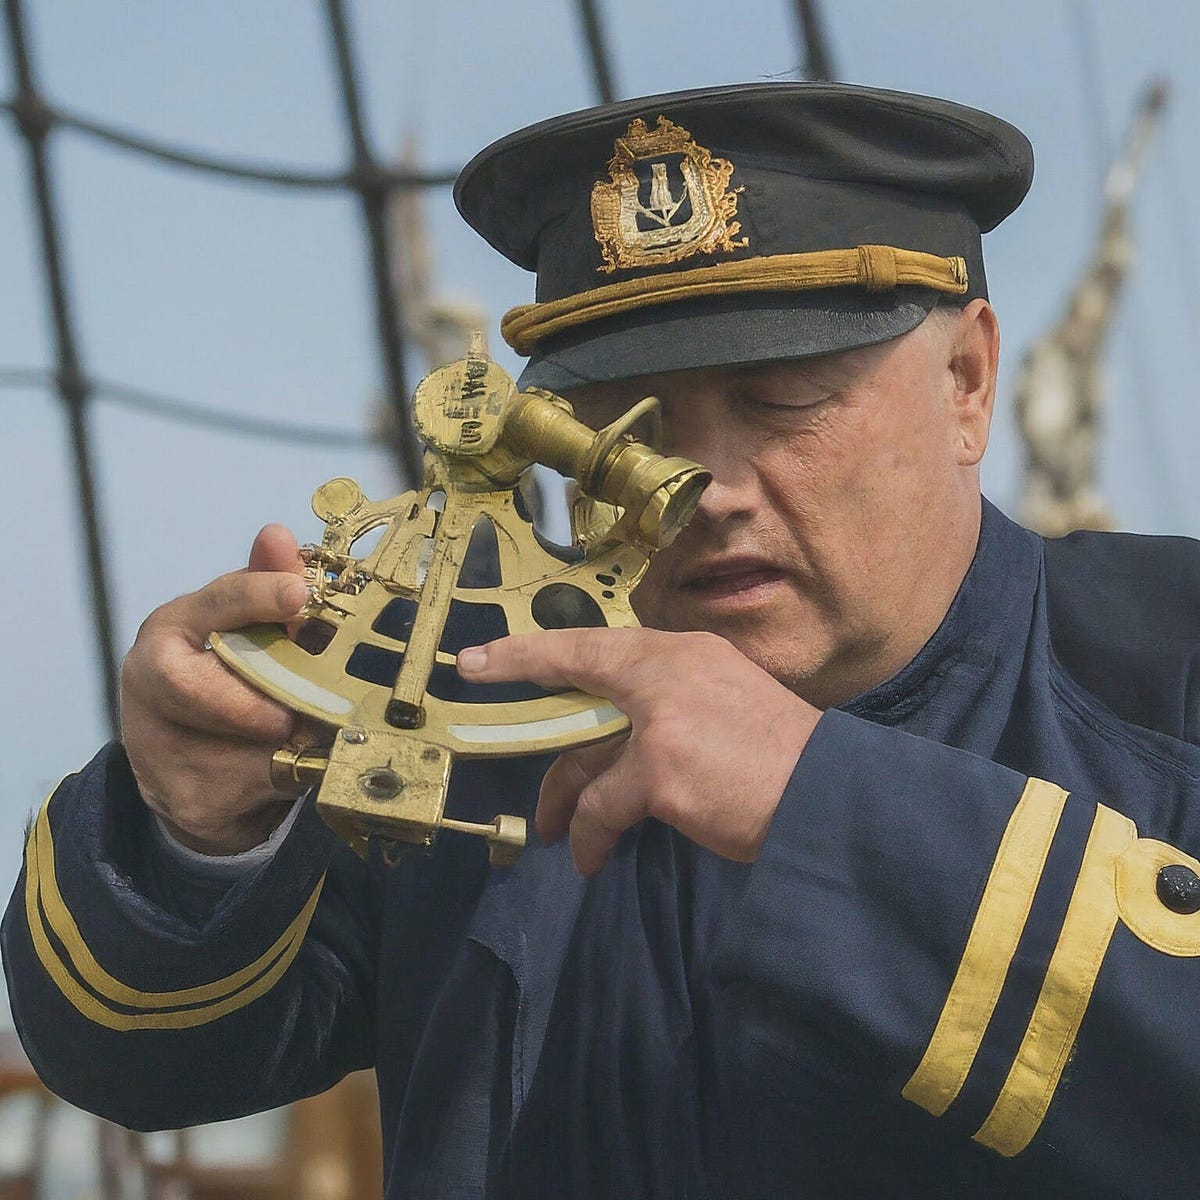 An AI-generated image of a sea captain holding a brass sextant incorrectly